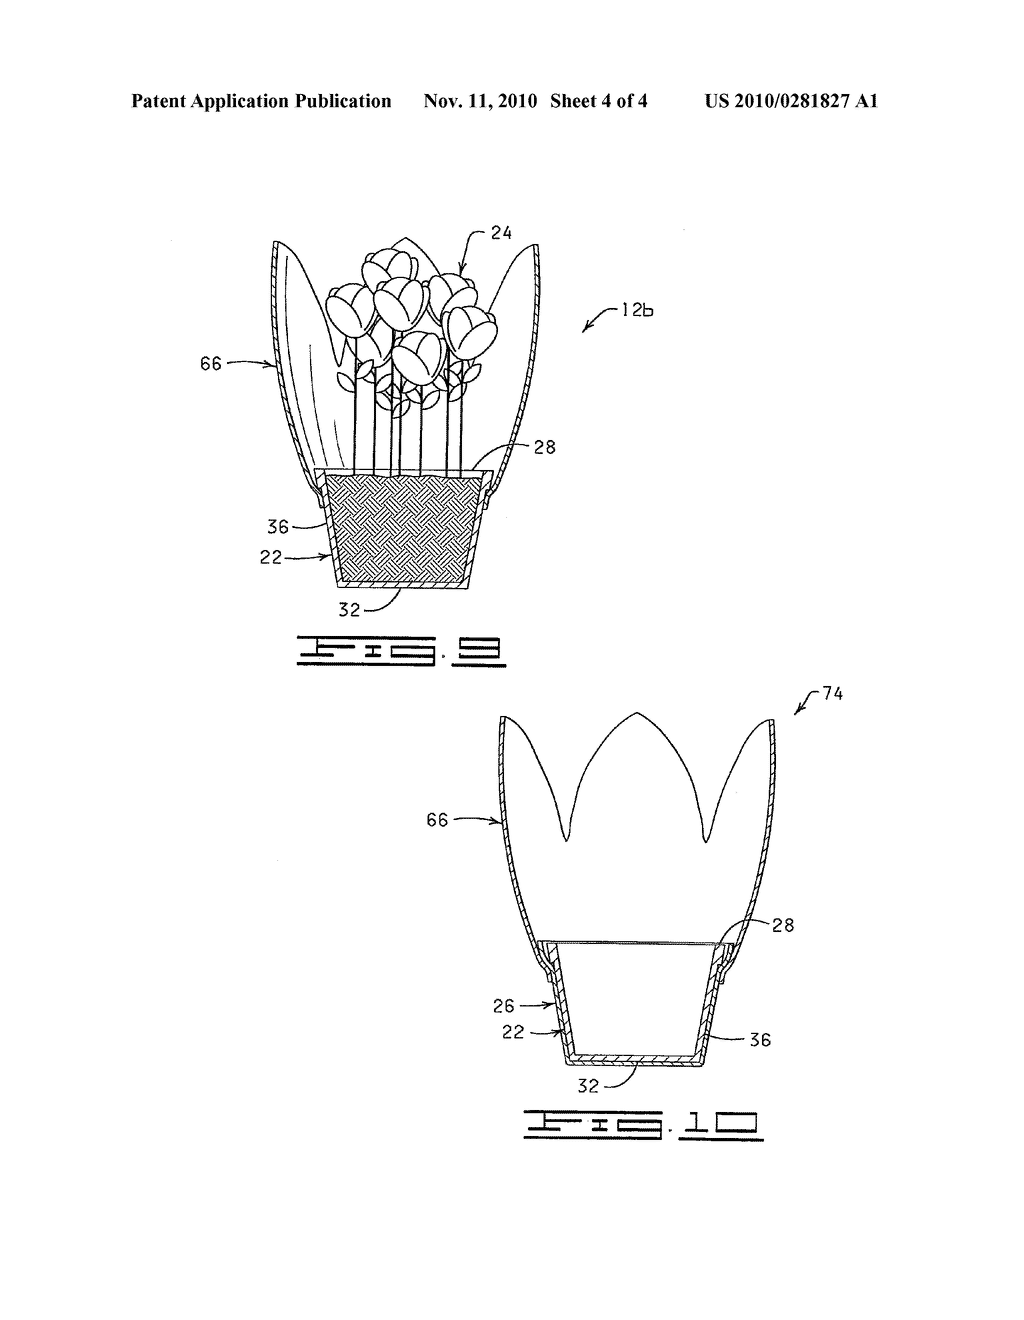 METHOD OF PROVIDING A DECORATIVE COVER FOR A FLOWER POT FORMED OF A HEAT SHRINKABLE MATERIAL - diagram, schematic, and image 05